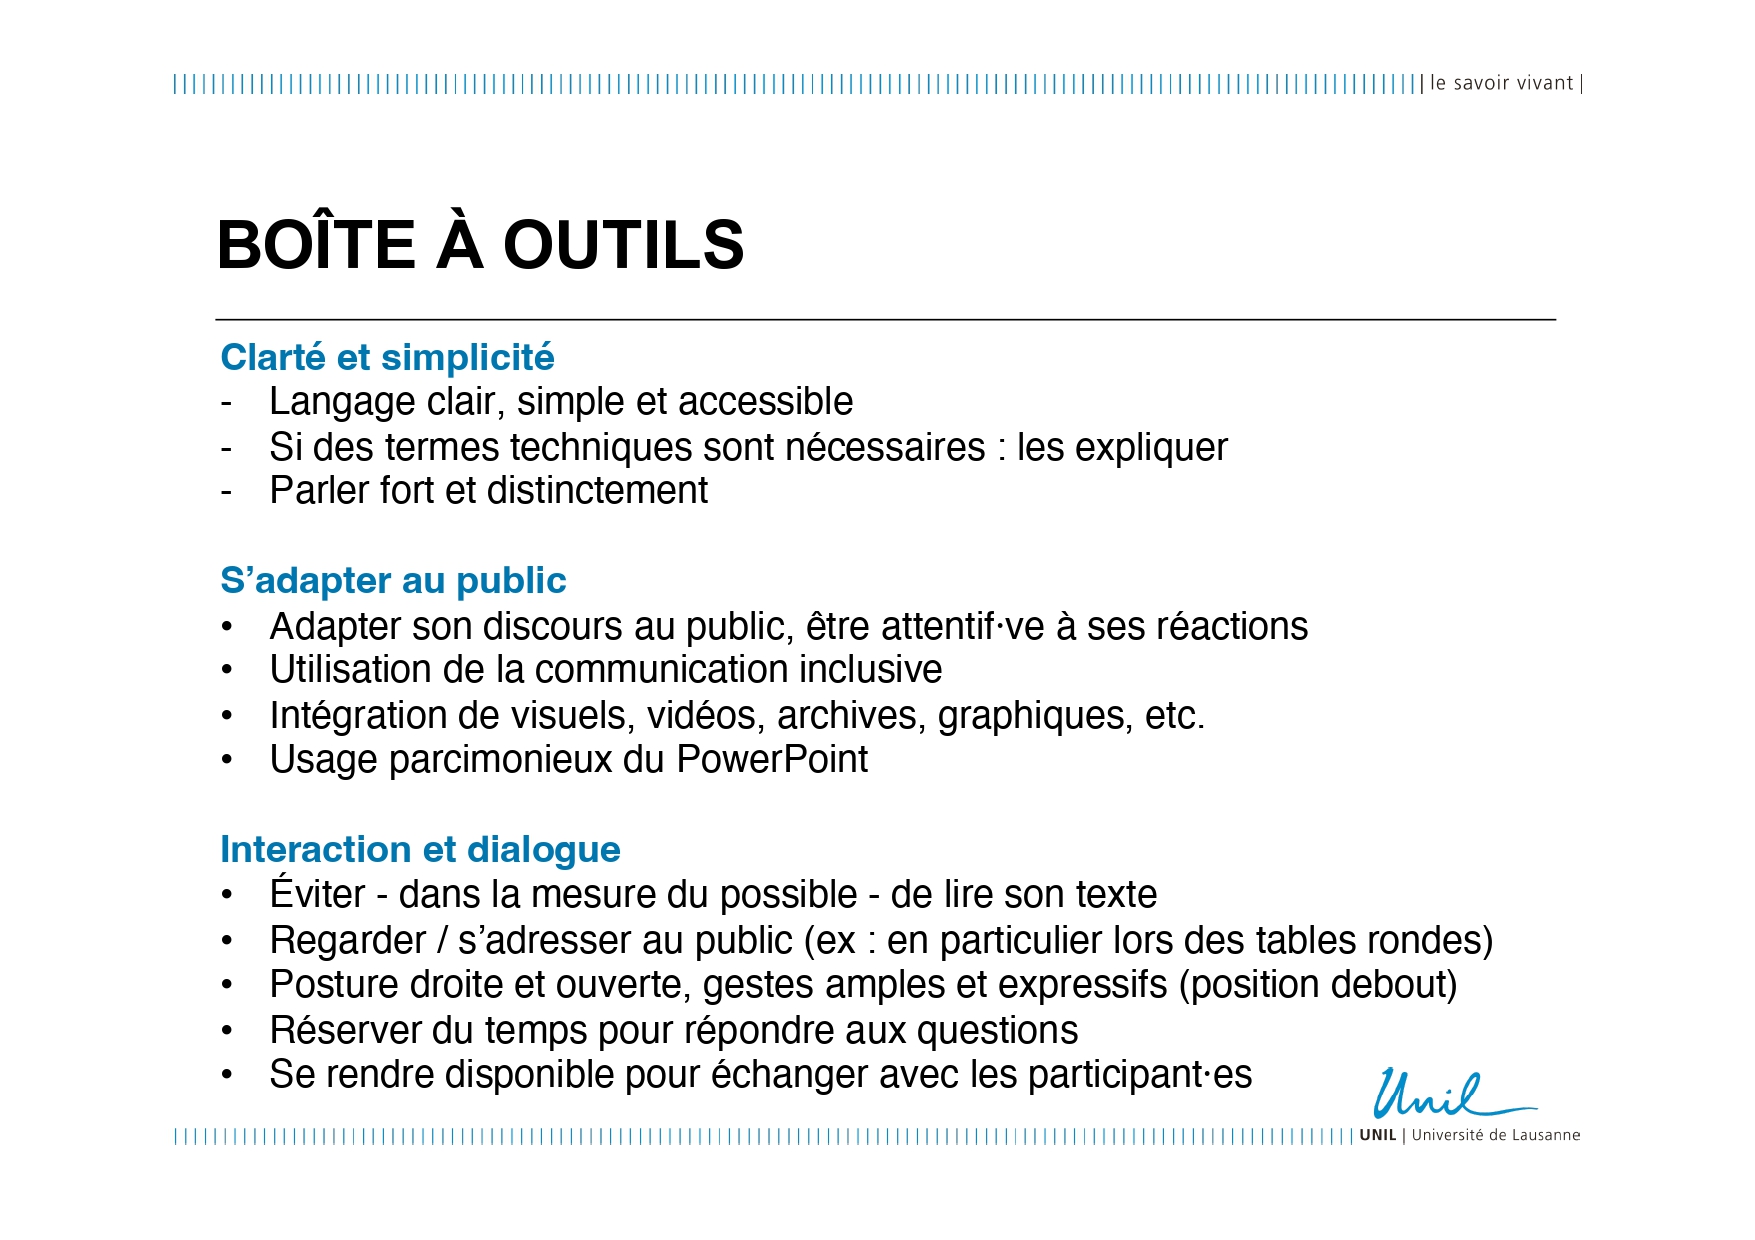 boite a outils_page-0001.jpg